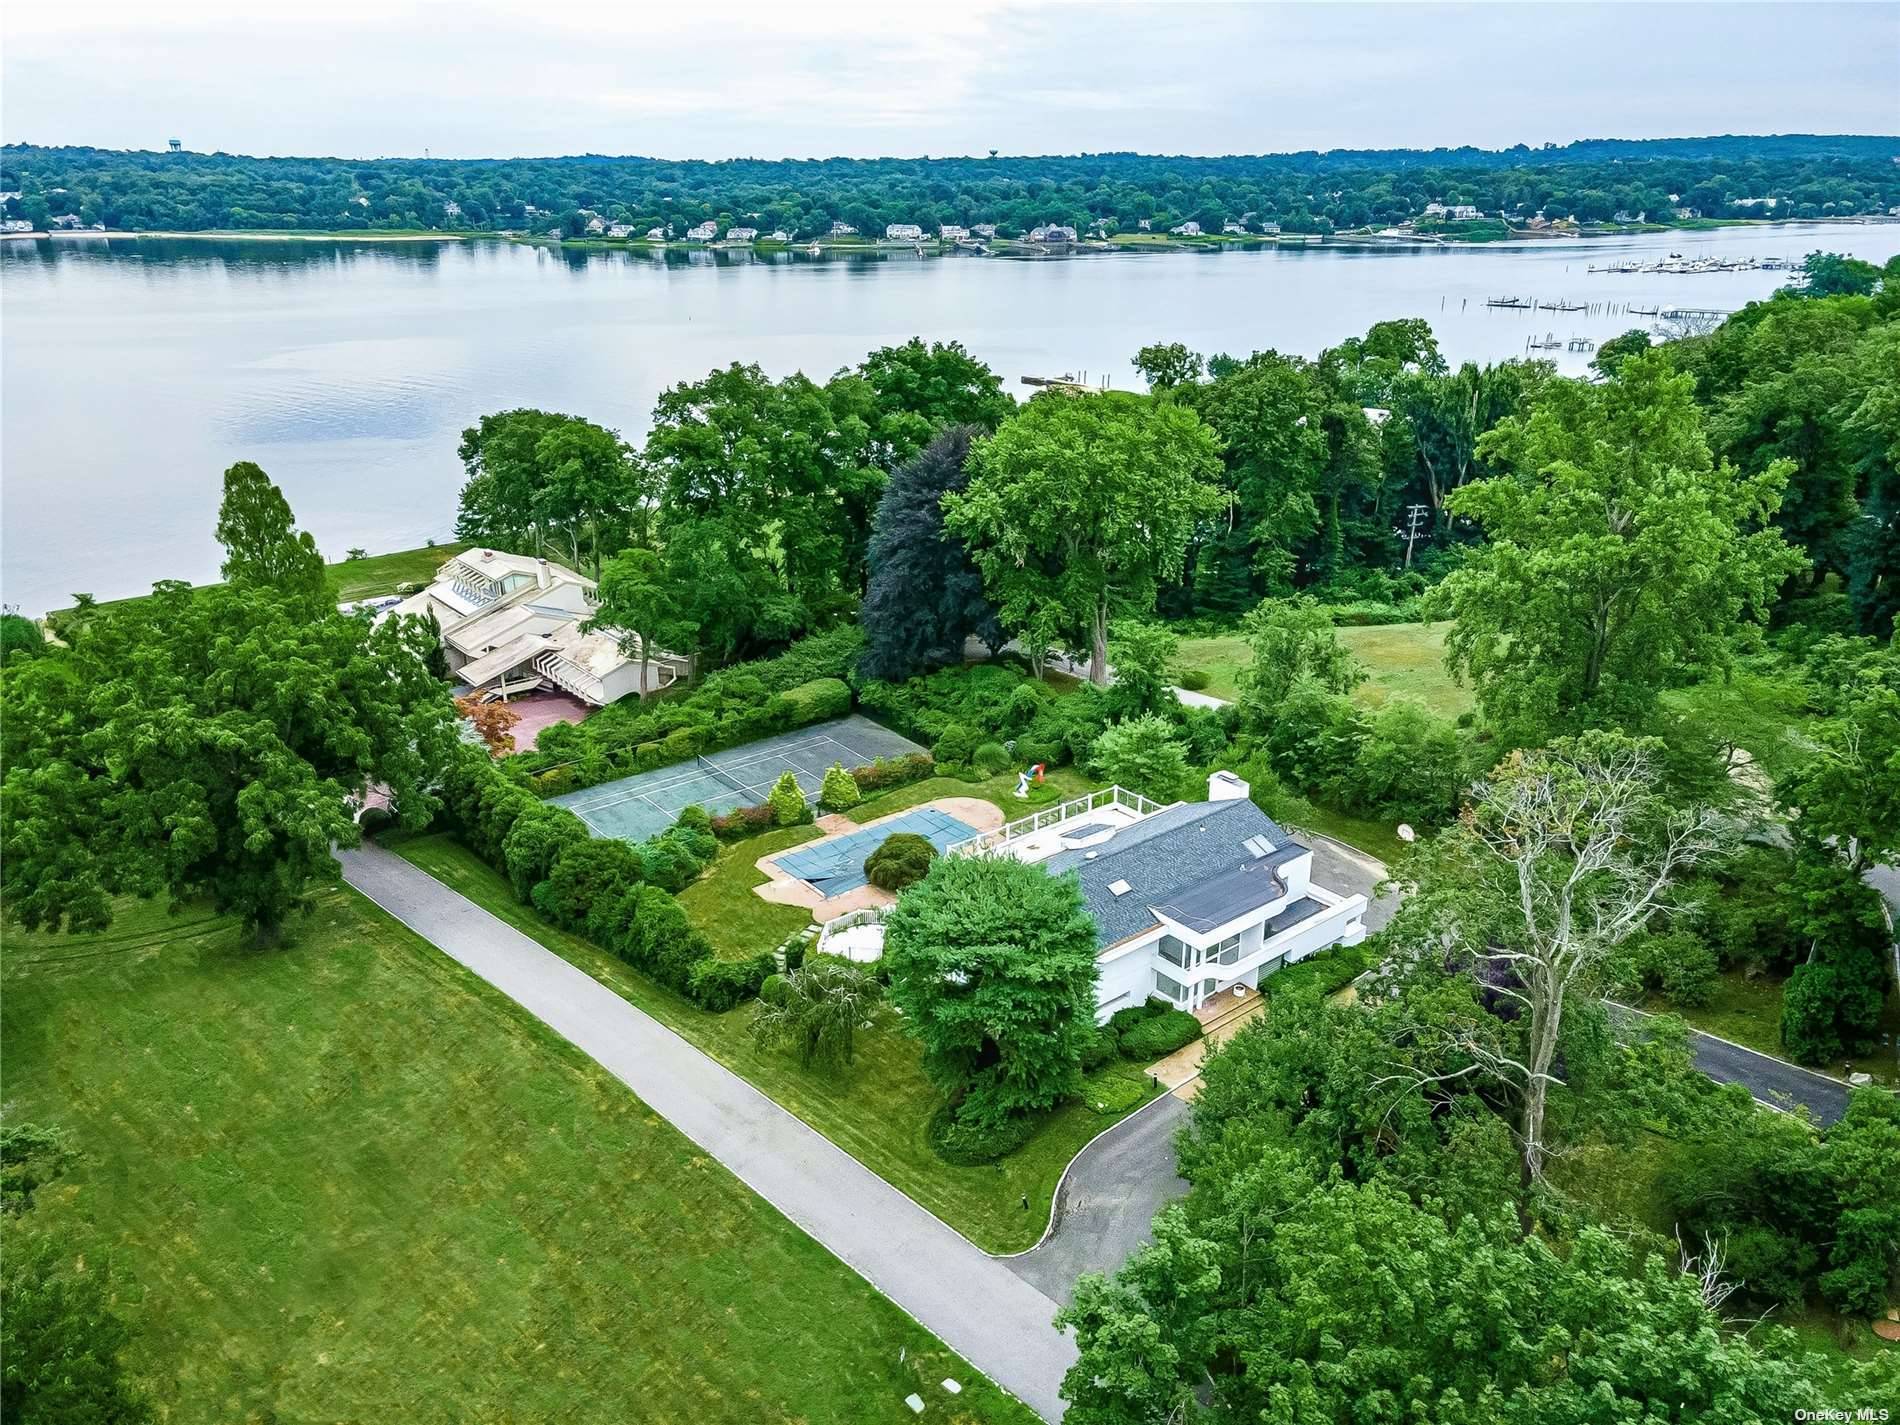 PRIME KINGS POINT Magnificent Water View Contemporary ; Sunny Open Floor Plan ; Wonderful Entertainment Flow ; Living Room, Dining Room, Den EIK, 6 Bedrooms, 5.